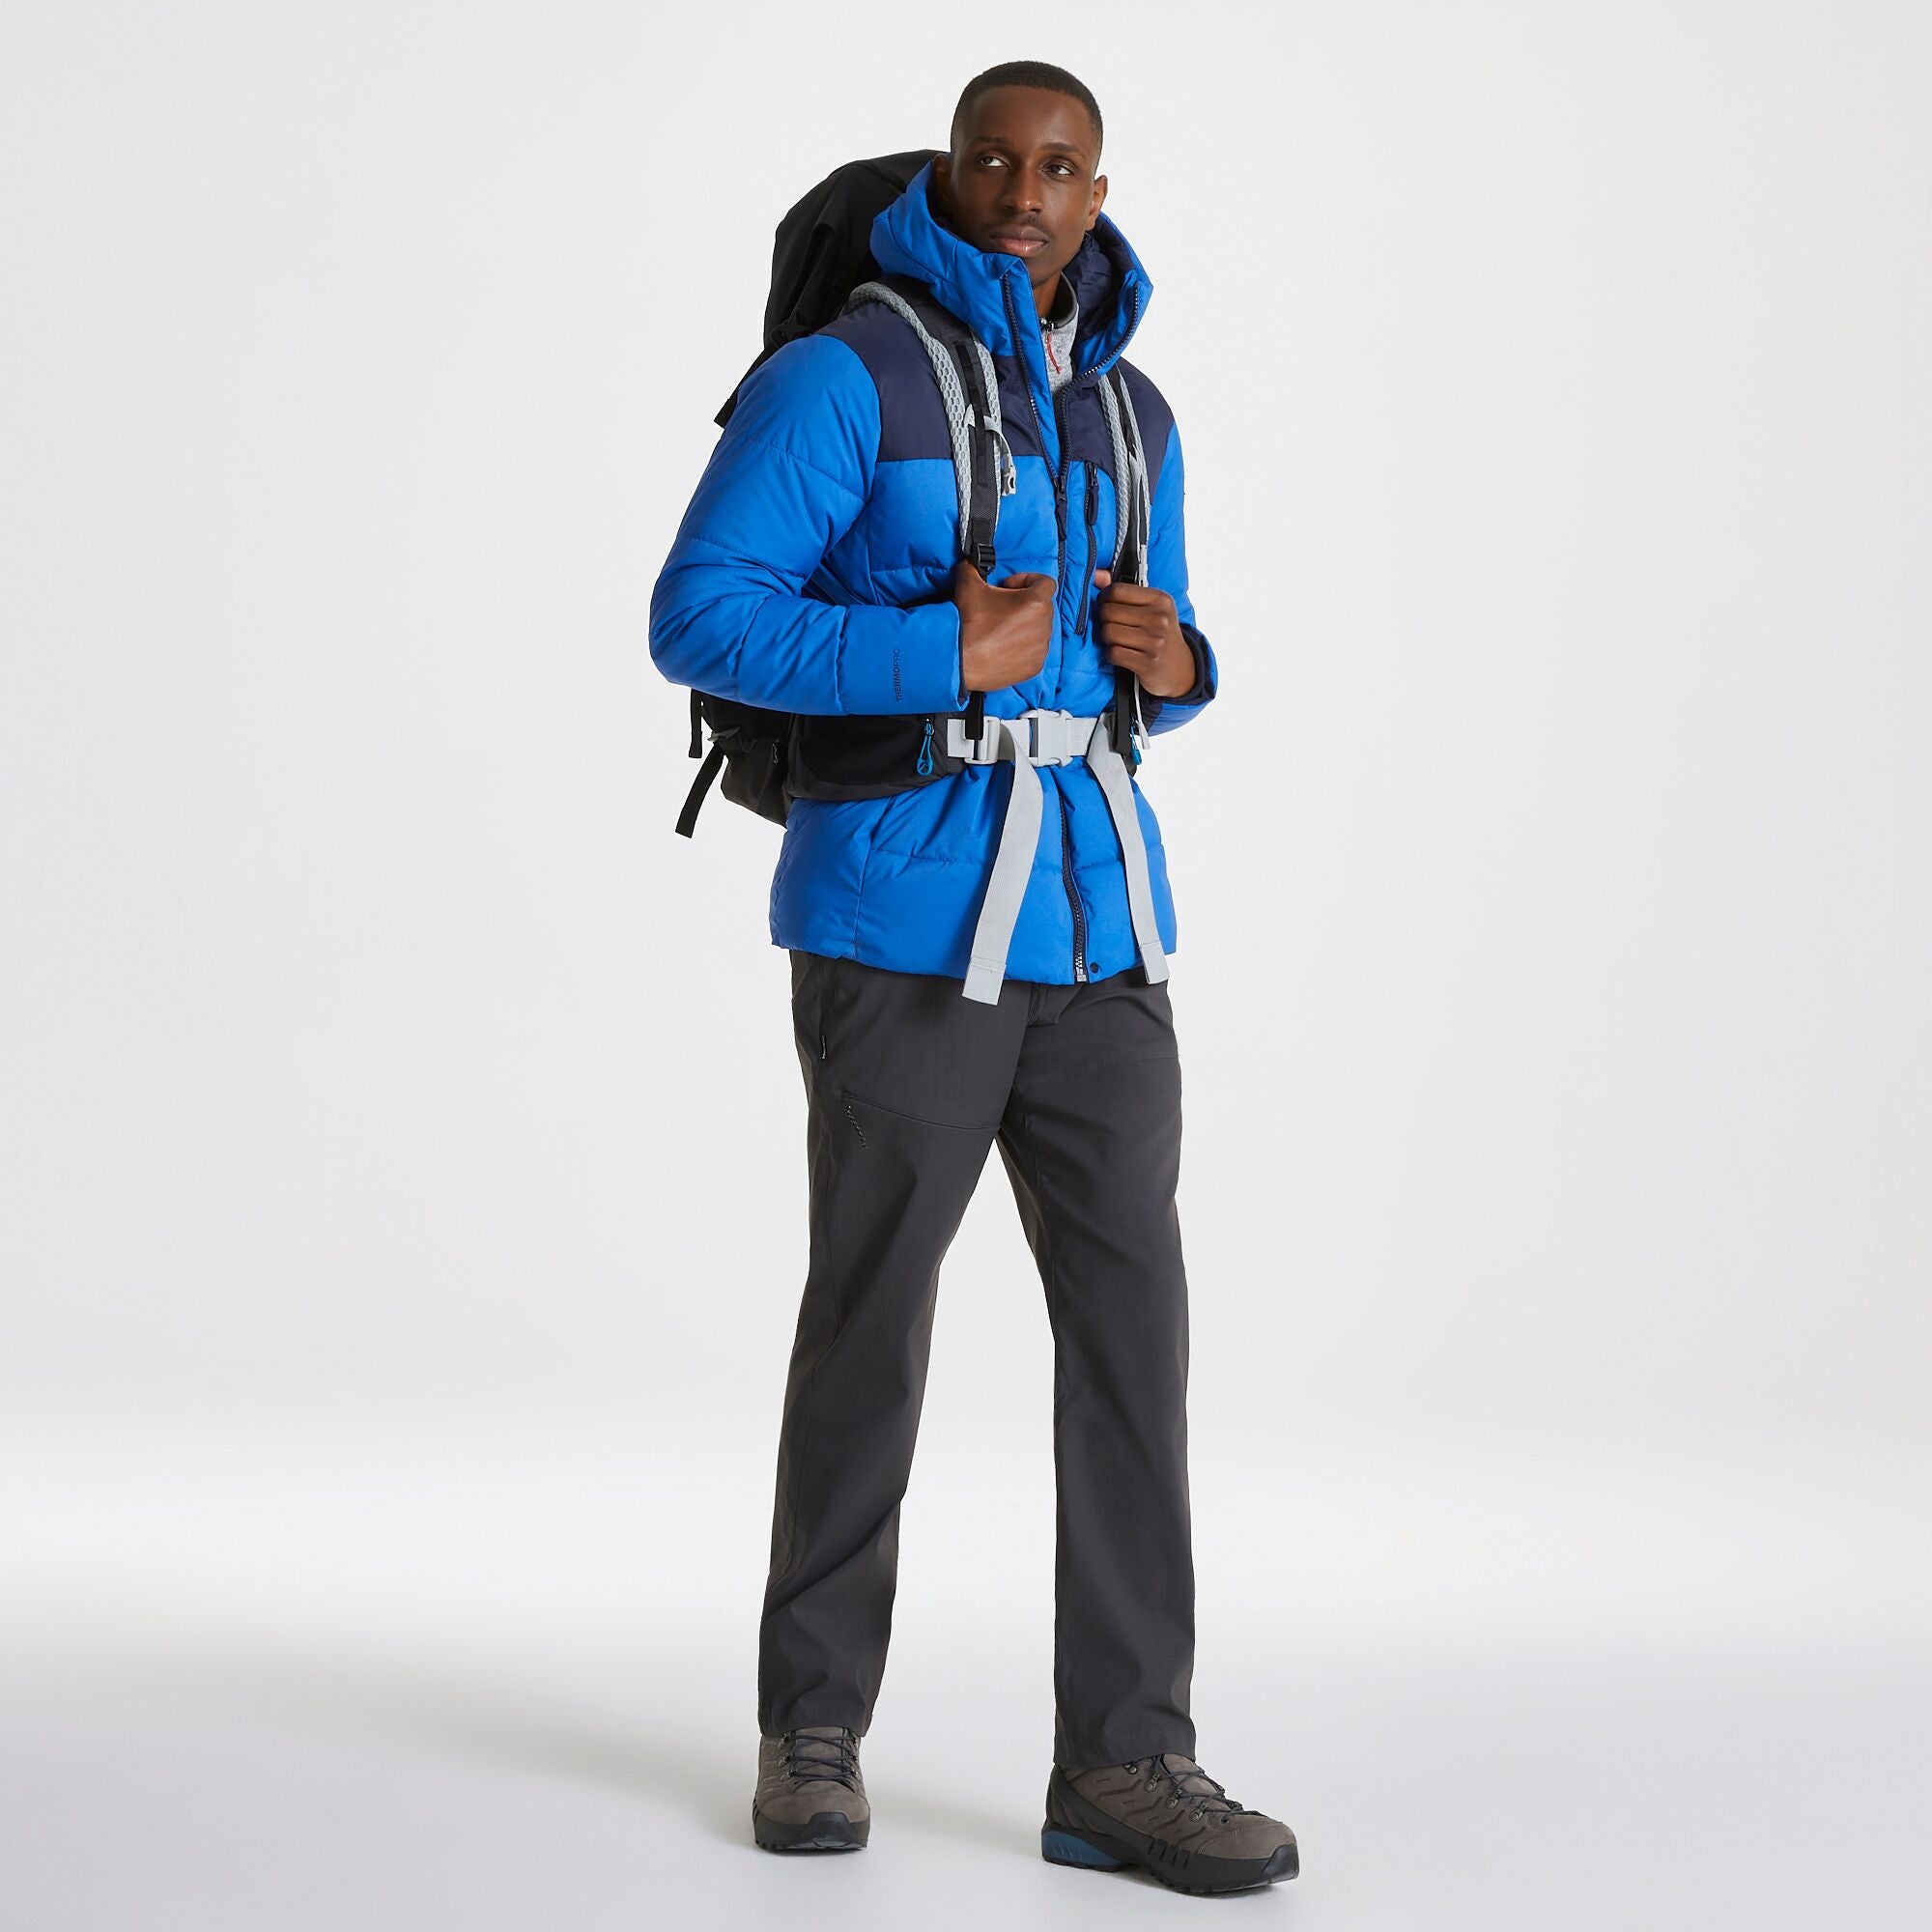 Men's Findhorn Insulated Hooded Jacket | Avalanche Blue/Blue Navy